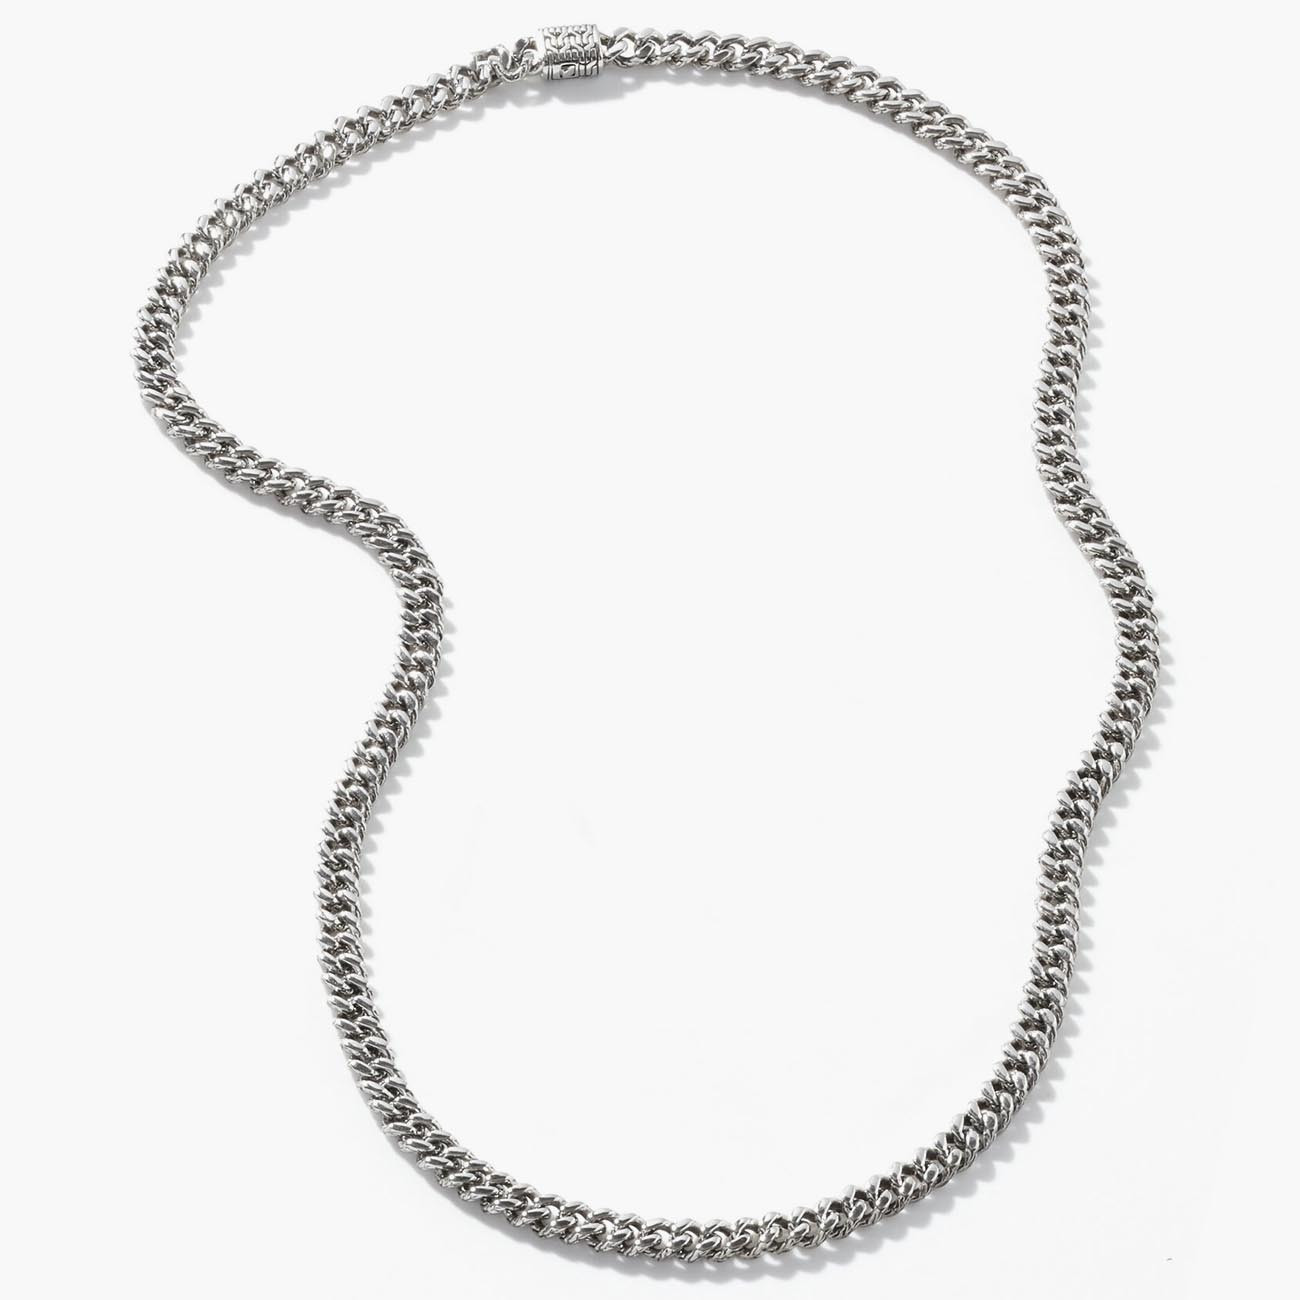 Chain Links Necklace in Sterling Silver